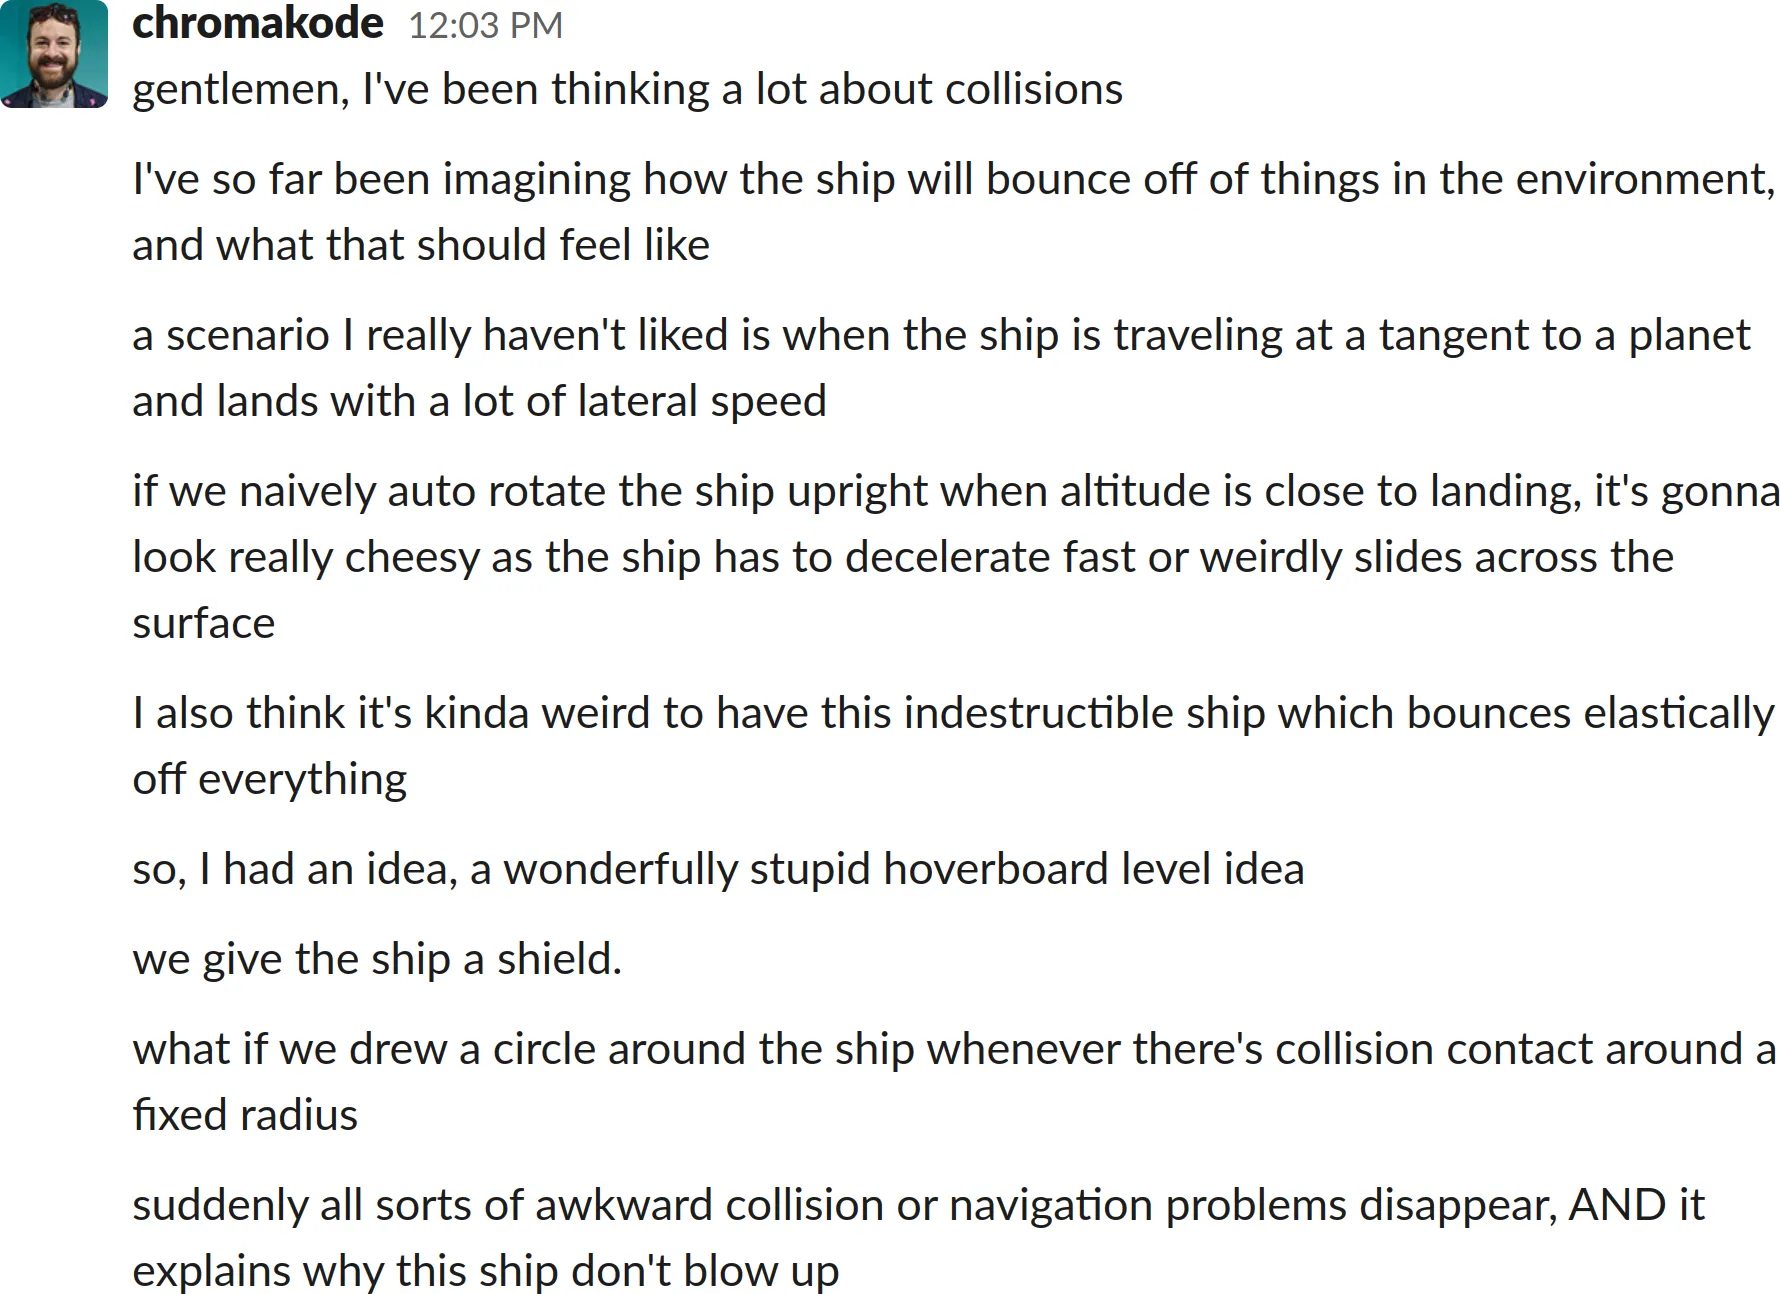 A screenshot of a Slack chat log transcript:
gentlemen, I've been thinking a lot about collisions
I've so far been imagining how the ship will bounce off of things in the environment, and what that should feel like
a scenario I really haven't liked is when the ship is traveling at a tangent to a planet and lands with a lot of lateral speed
if we naively auto rotate the ship upright when altitude is close to landing, it's gonna look really cheesy as the ship has to decelerate fast or weirdly slides across the surface
I also think it's kinda weird to have this indestructible ship which bounces elastically off everything
so, I had an idea, a wonderfully stupid hoverboard level idea
we give the ship a shield.
what if we drew a circle around the ship whenever there's collision contact around a fixed radius
suddenly all sorts of awkward collision or navigation problems disappear, AND it explains why this ship don't blow up